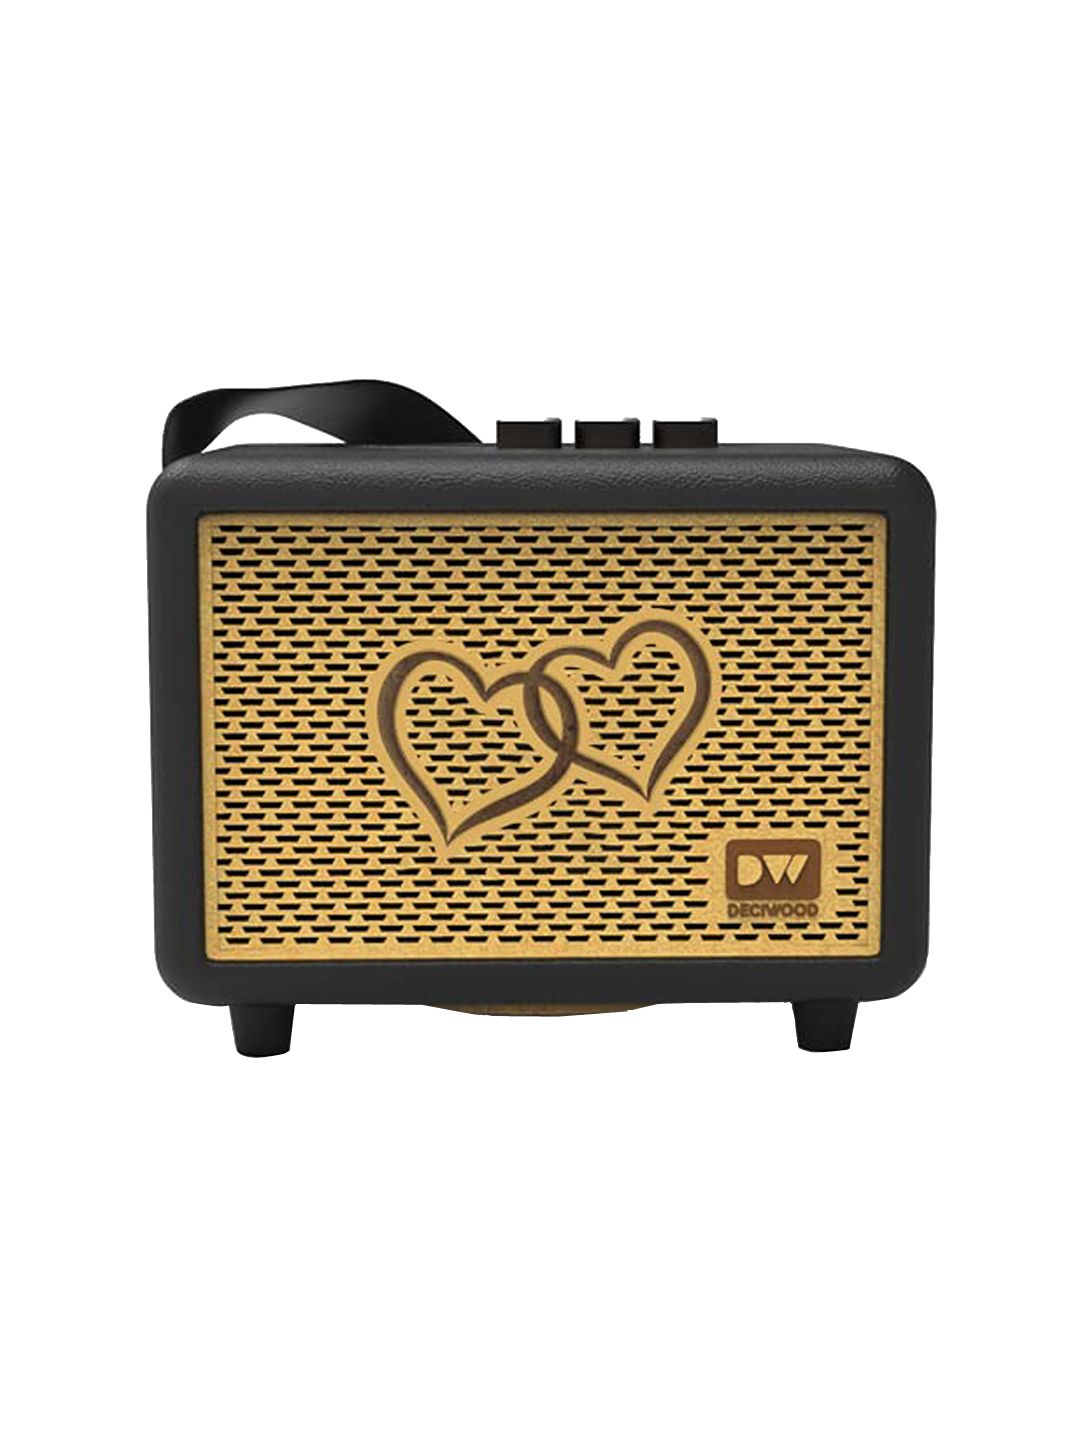 DECIWOOD Black Solid Curved 35W Wooden Portable Bluetooth Speaker Price in India